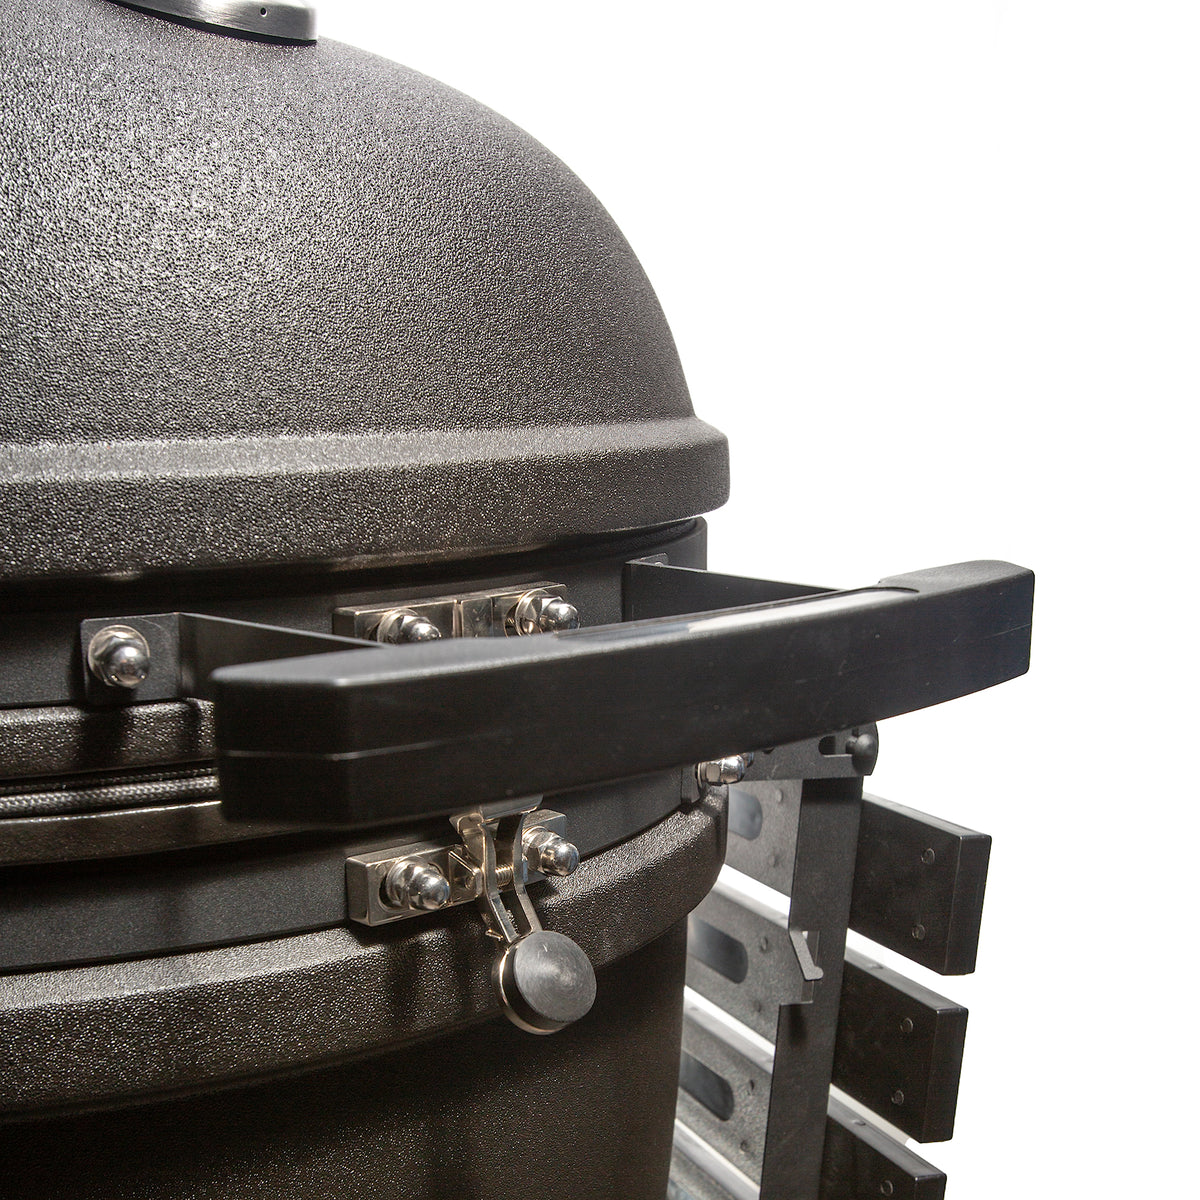 Draco Grills 27 Inch Kamado Grill with Wire Stand